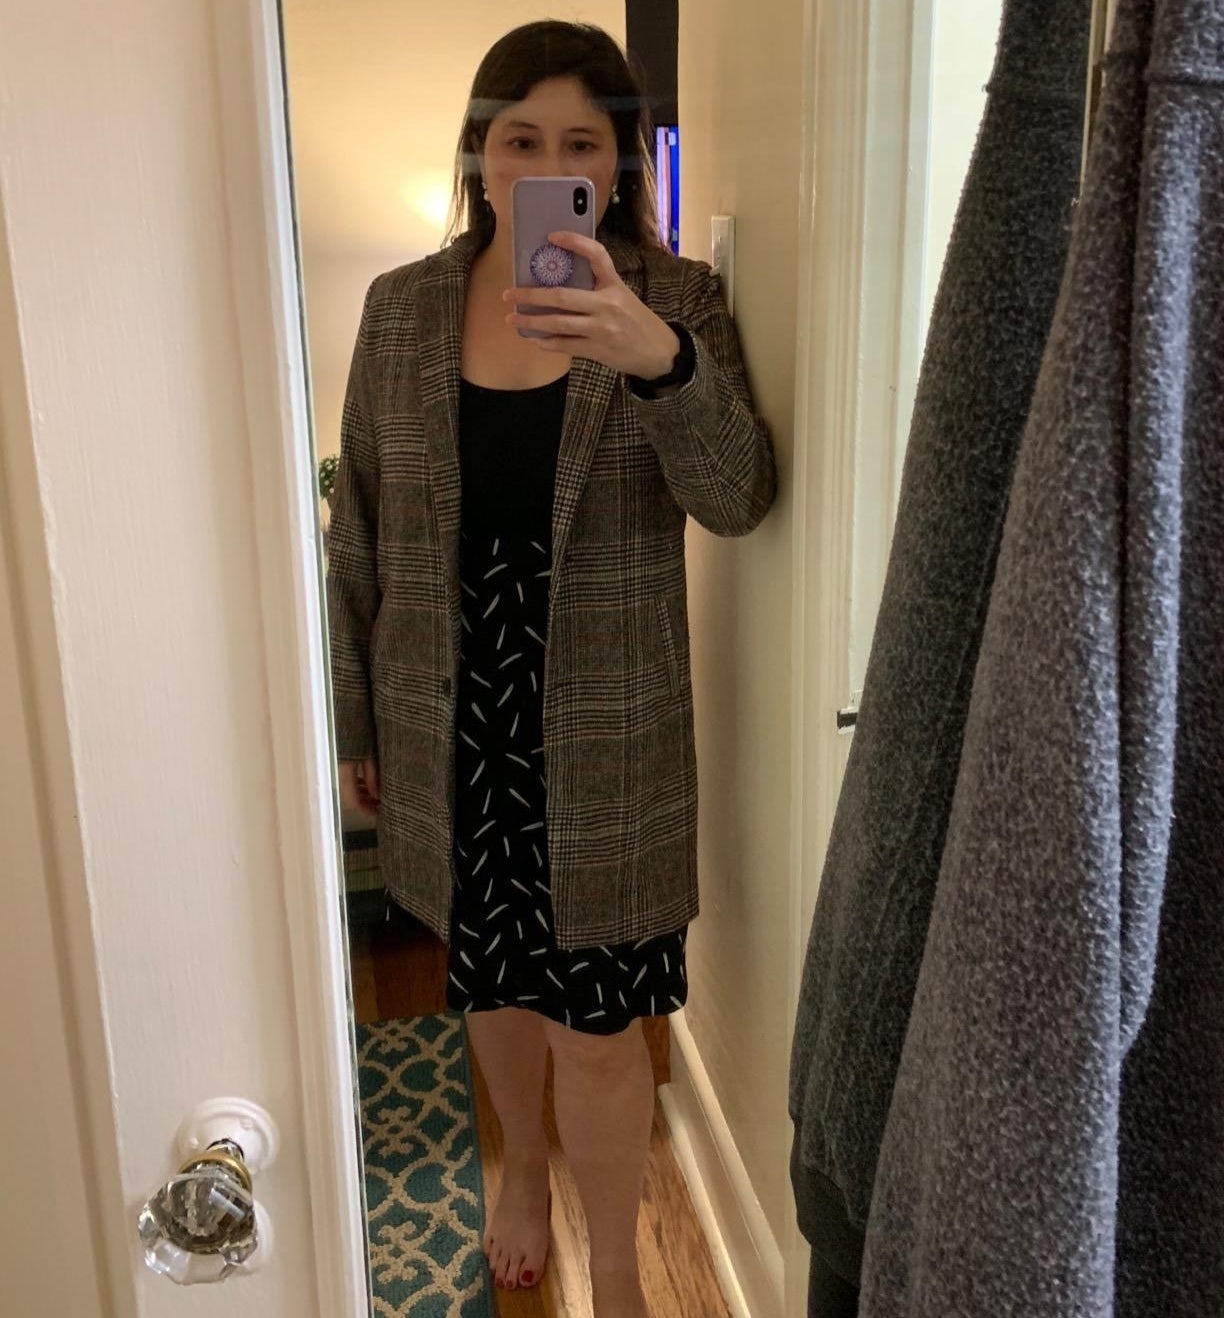 The blazer worn by an Amazon reviewer